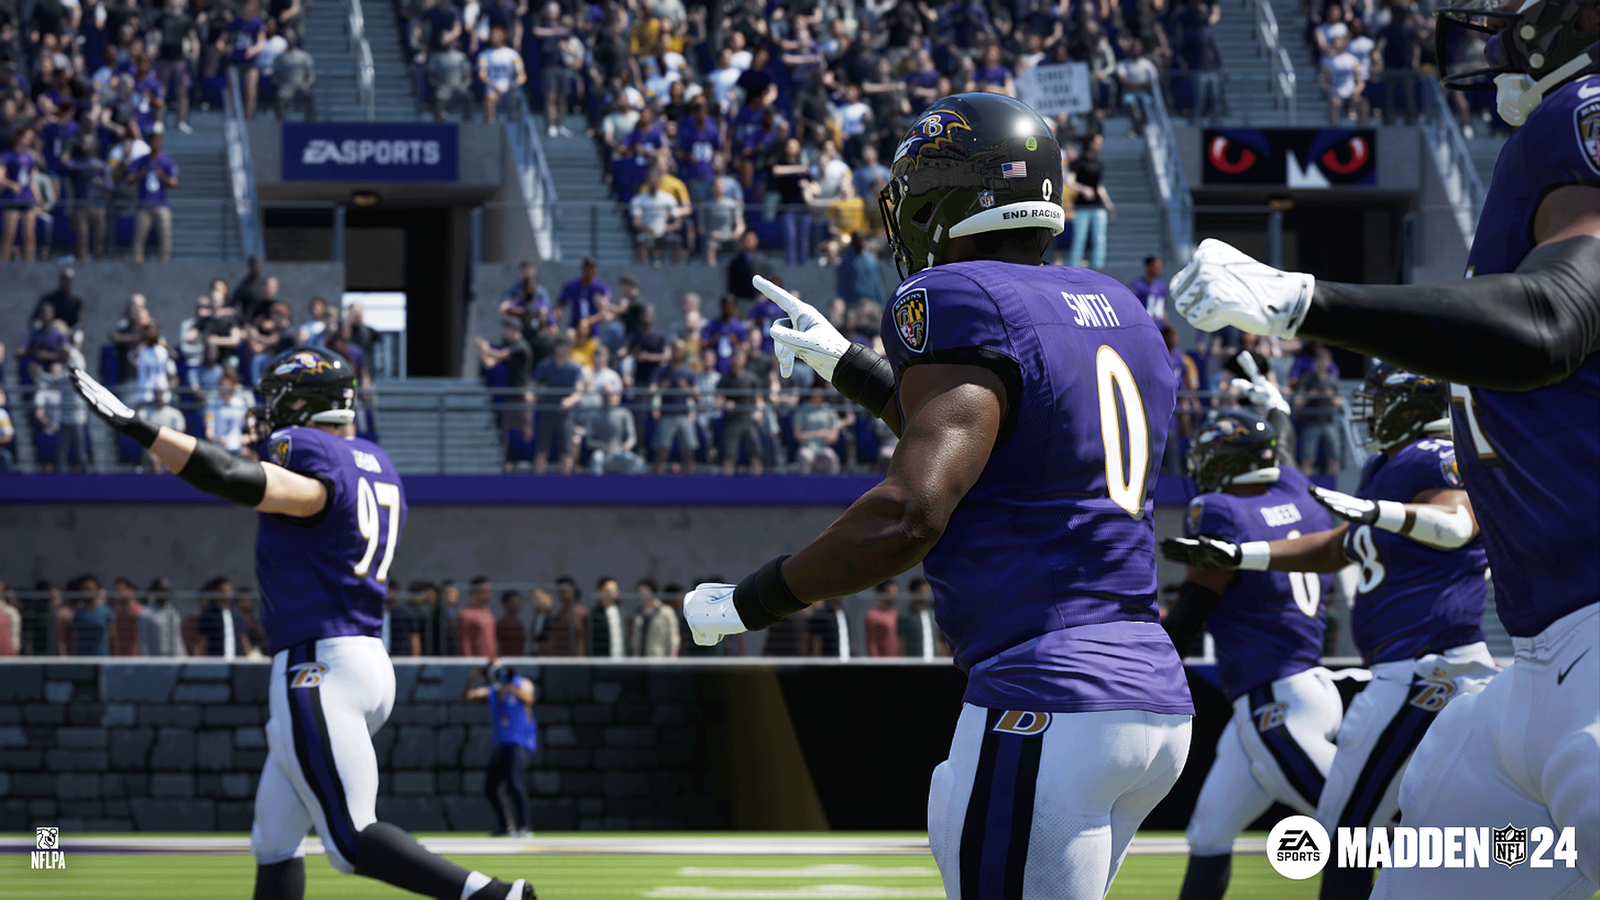 Madden NFL 24 10-hour trial available for EA Play members